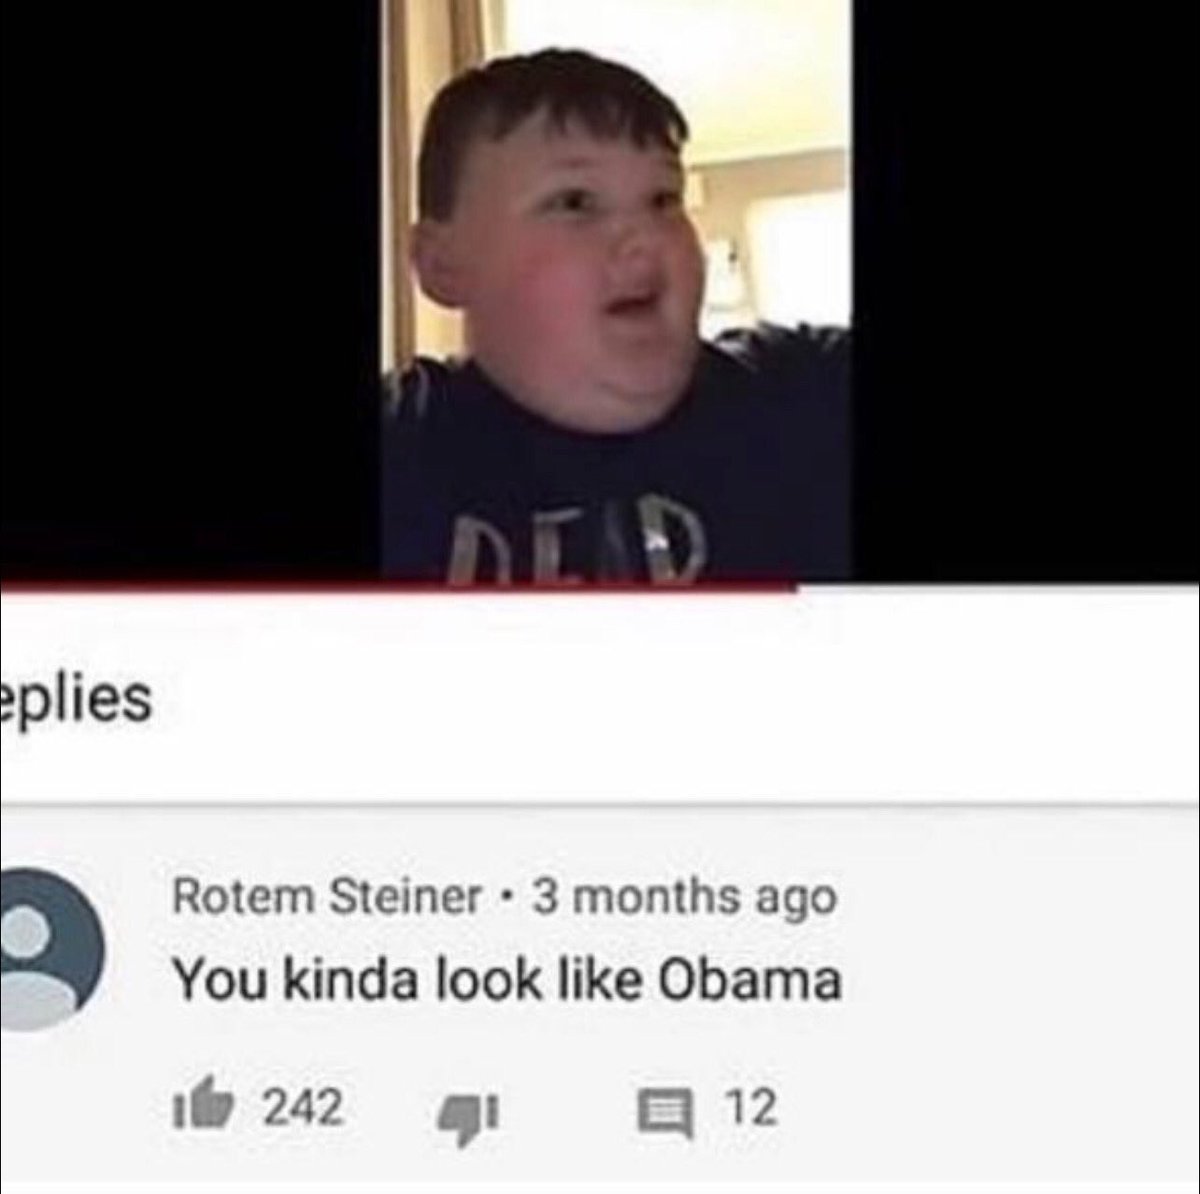 insane youtube comments - he's not wrong tho - eplies Dead Rotem Steiner 3 months ago You kinda look Obama 1242 41 12